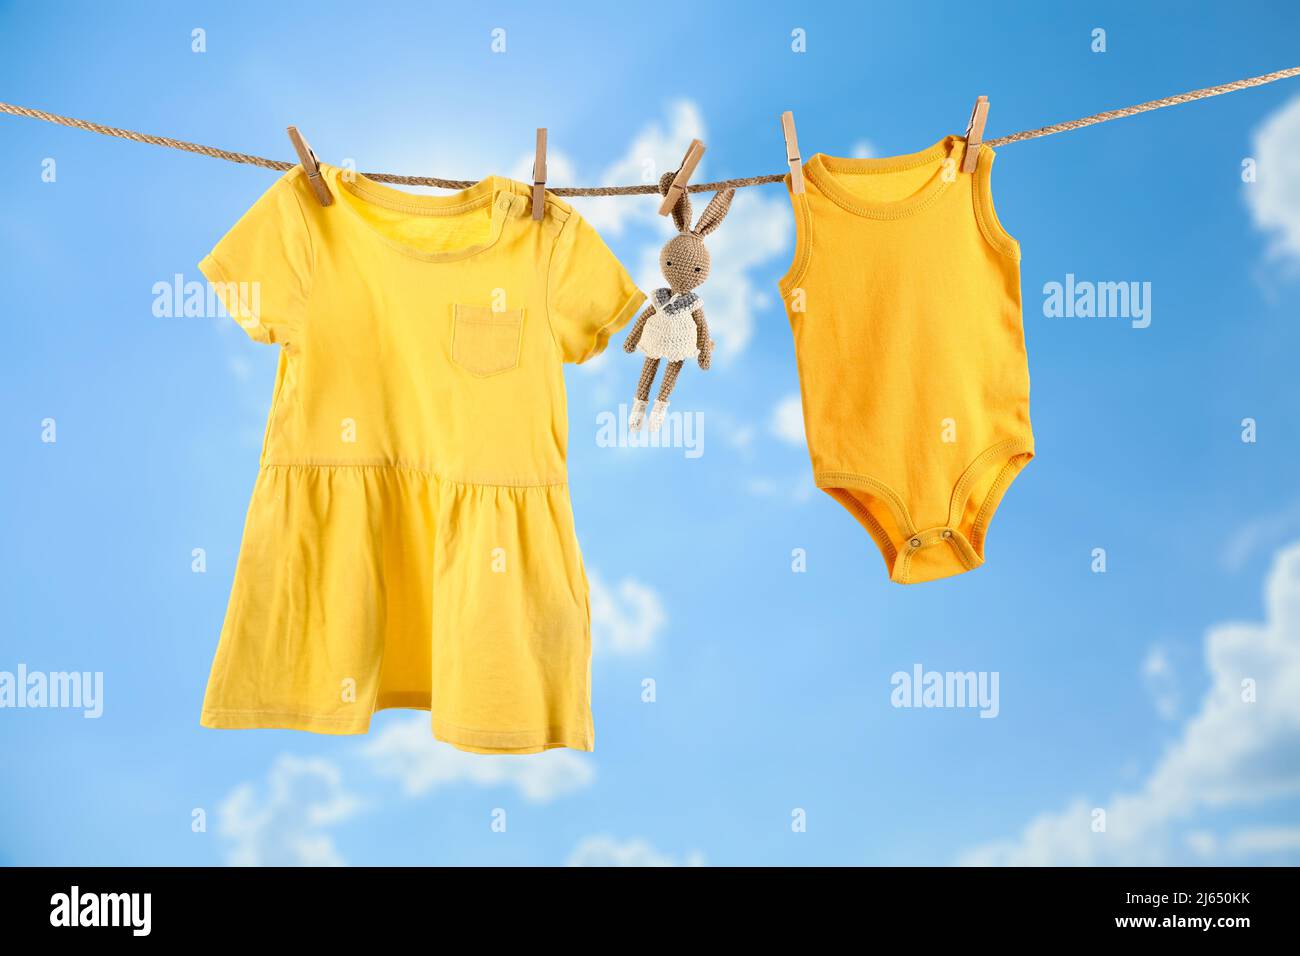 Baby clothes and toy hanging on rope against blue sky Stock Photo